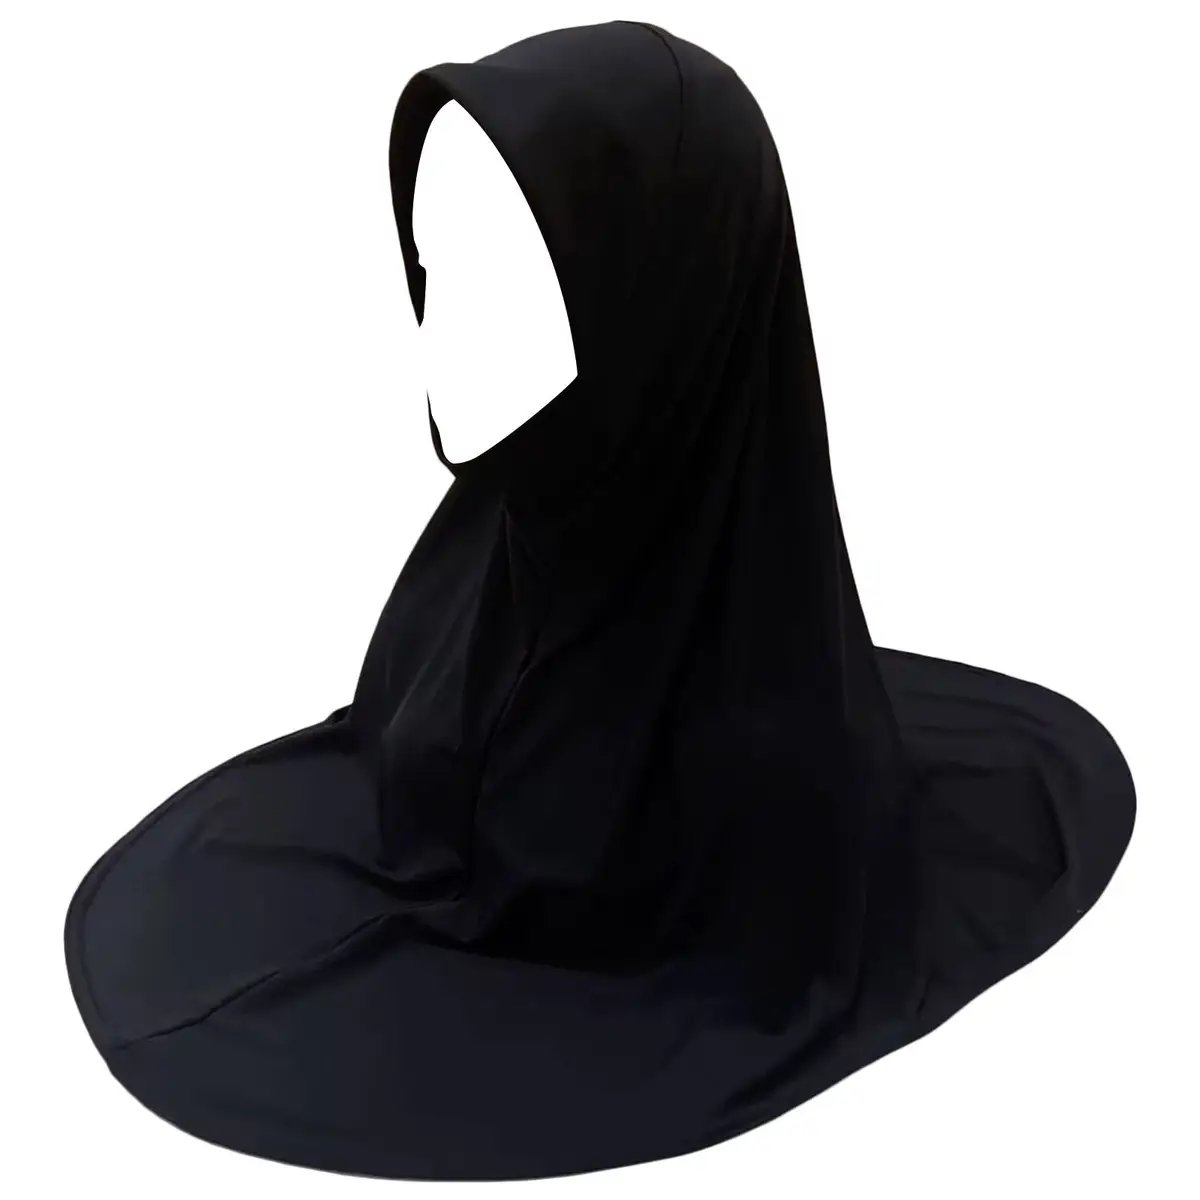 made-of-lightweight-comfortable-linen-black-instant-hijab